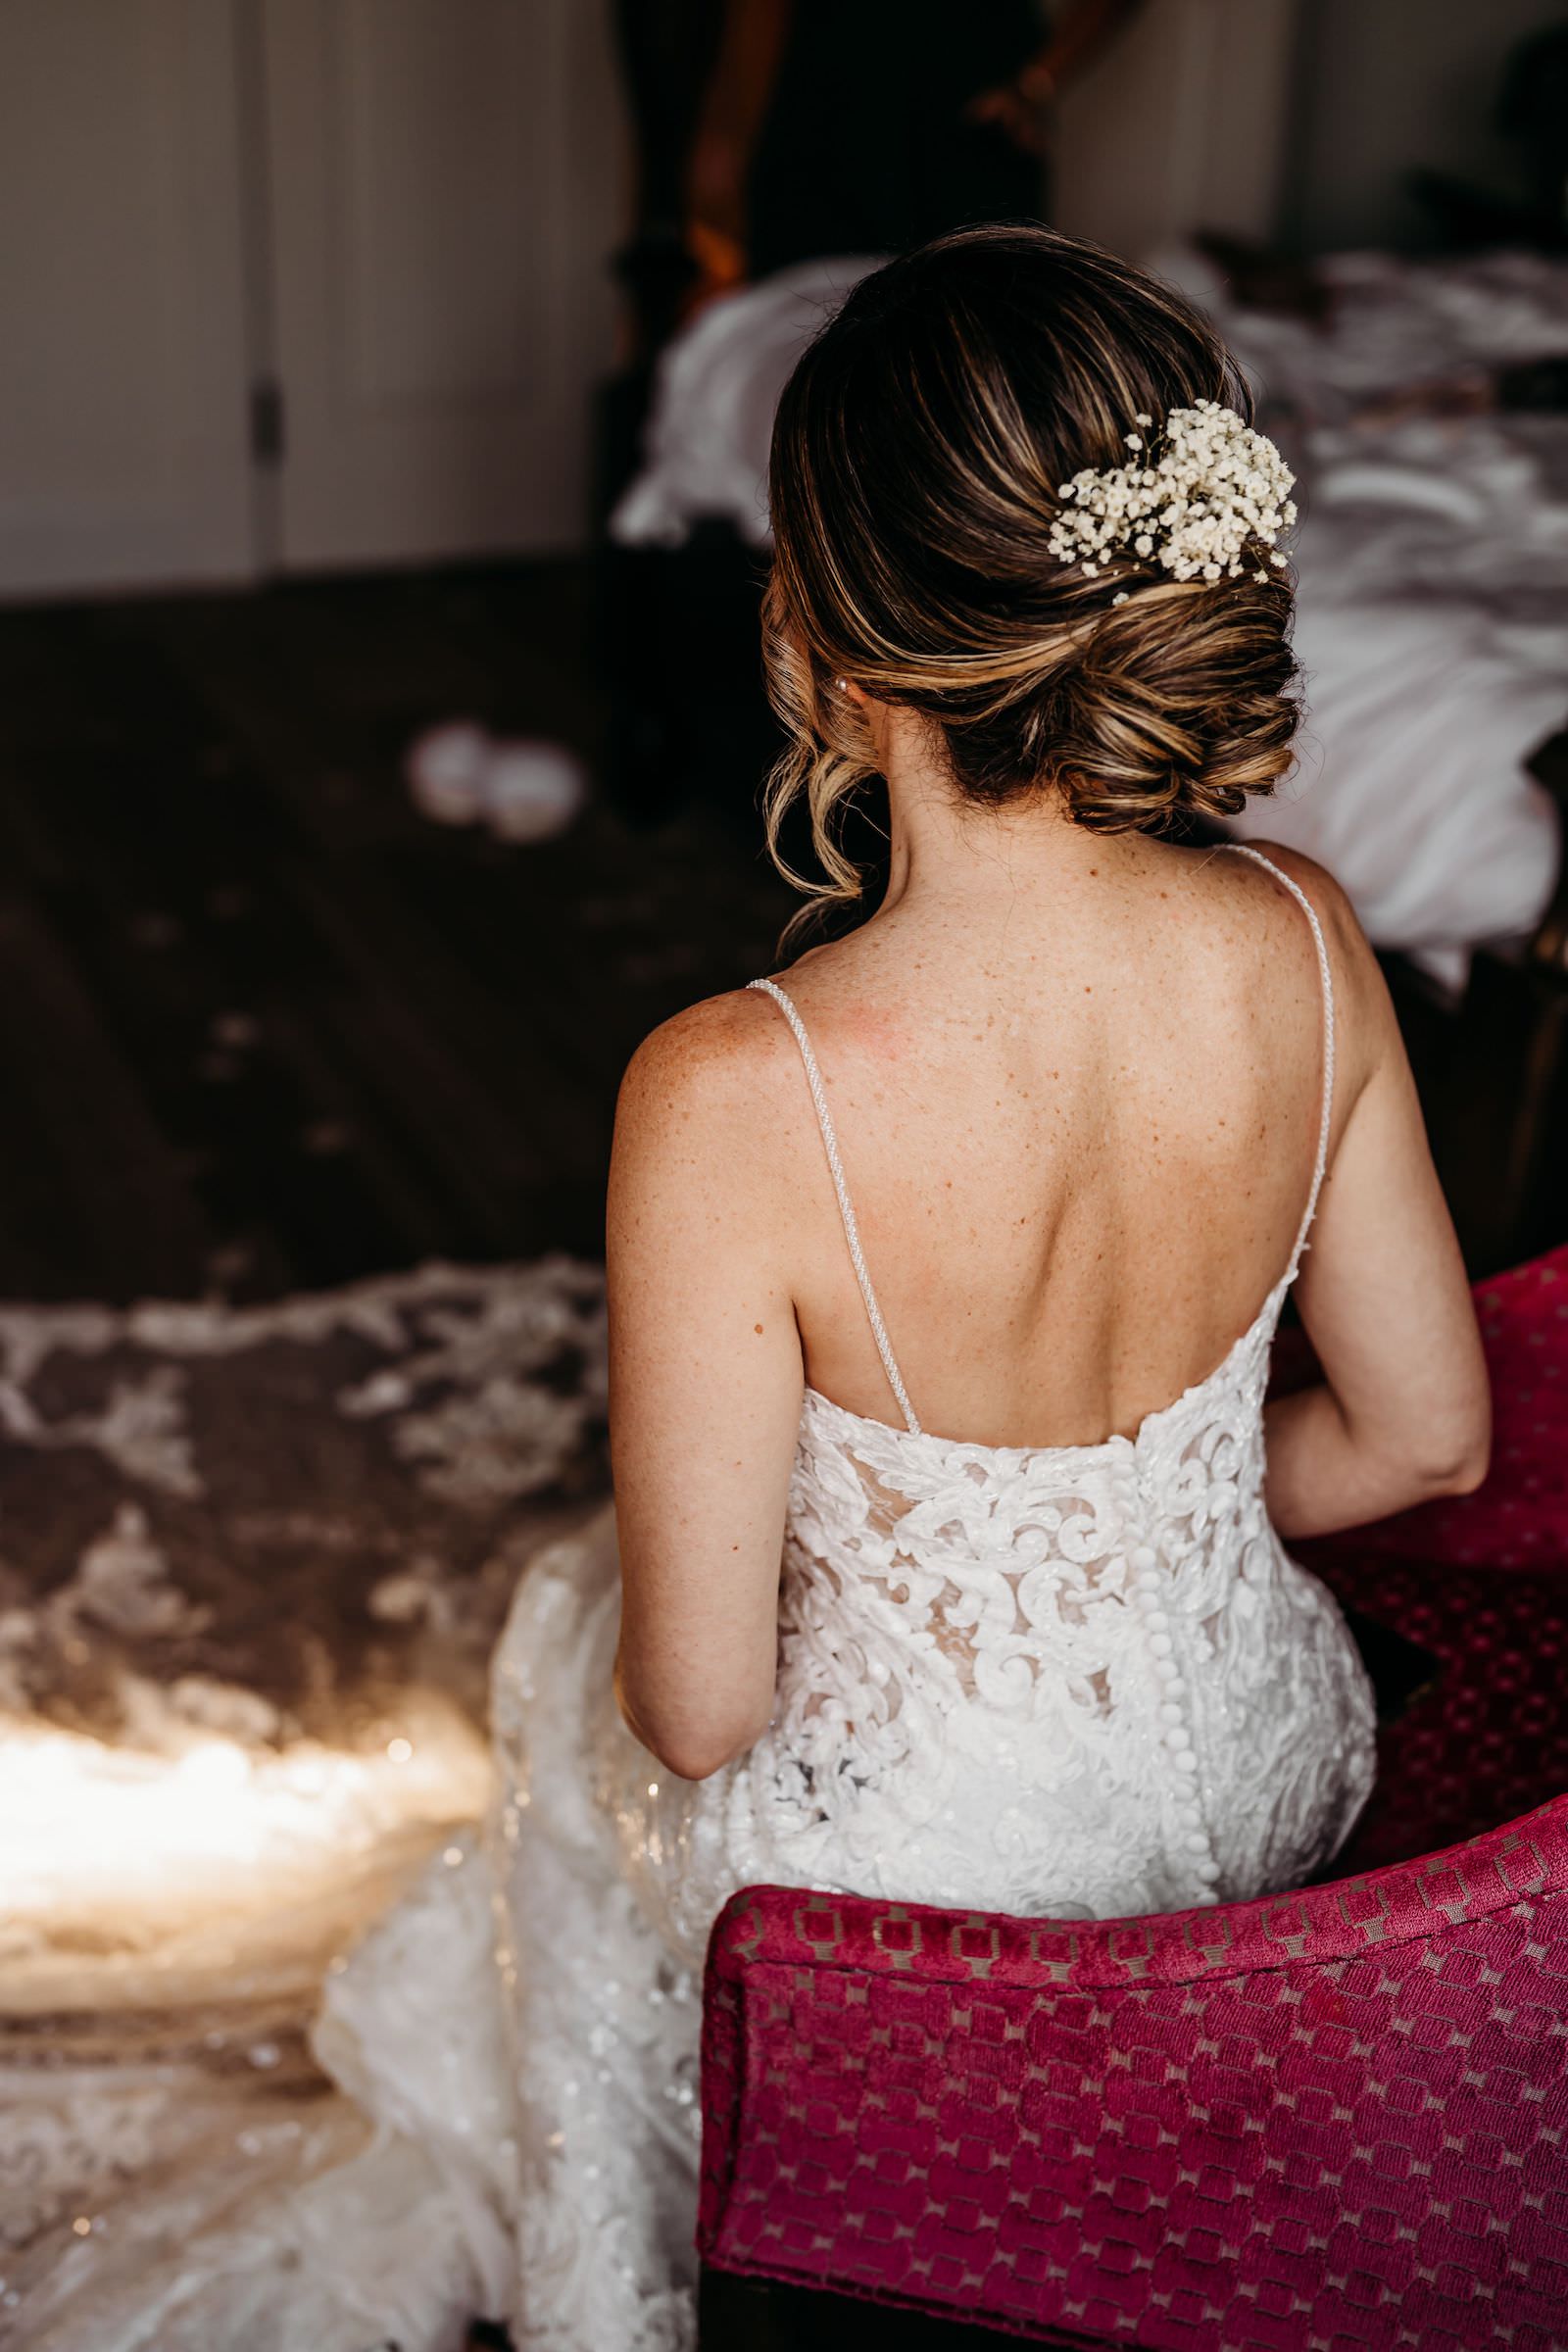 Bride Getting Wedding Ready Wearing Open Back Lace and Illusion Wedding Dress, Updo with Baby's Breath Flower Piece | Tampa Bay Wedding Hair and Makeup Adore Bridal